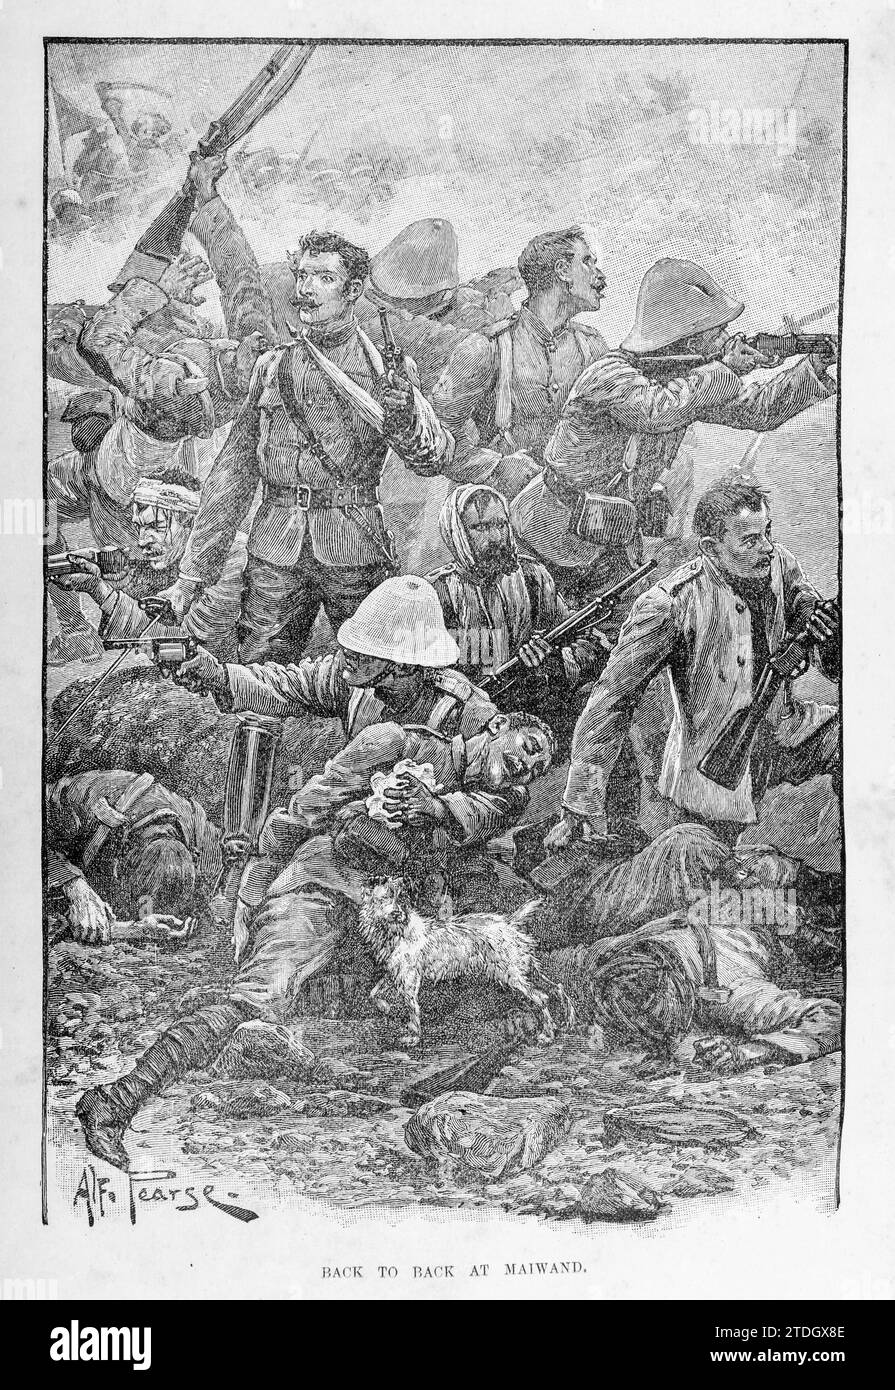 The last stand of the 66th Regiment at the Battle of Maiwand (27th July 1880) during the Second Afghan War. Only a few British troops survived, along with the dog Bobbie, the regimental mascot Stock Photo